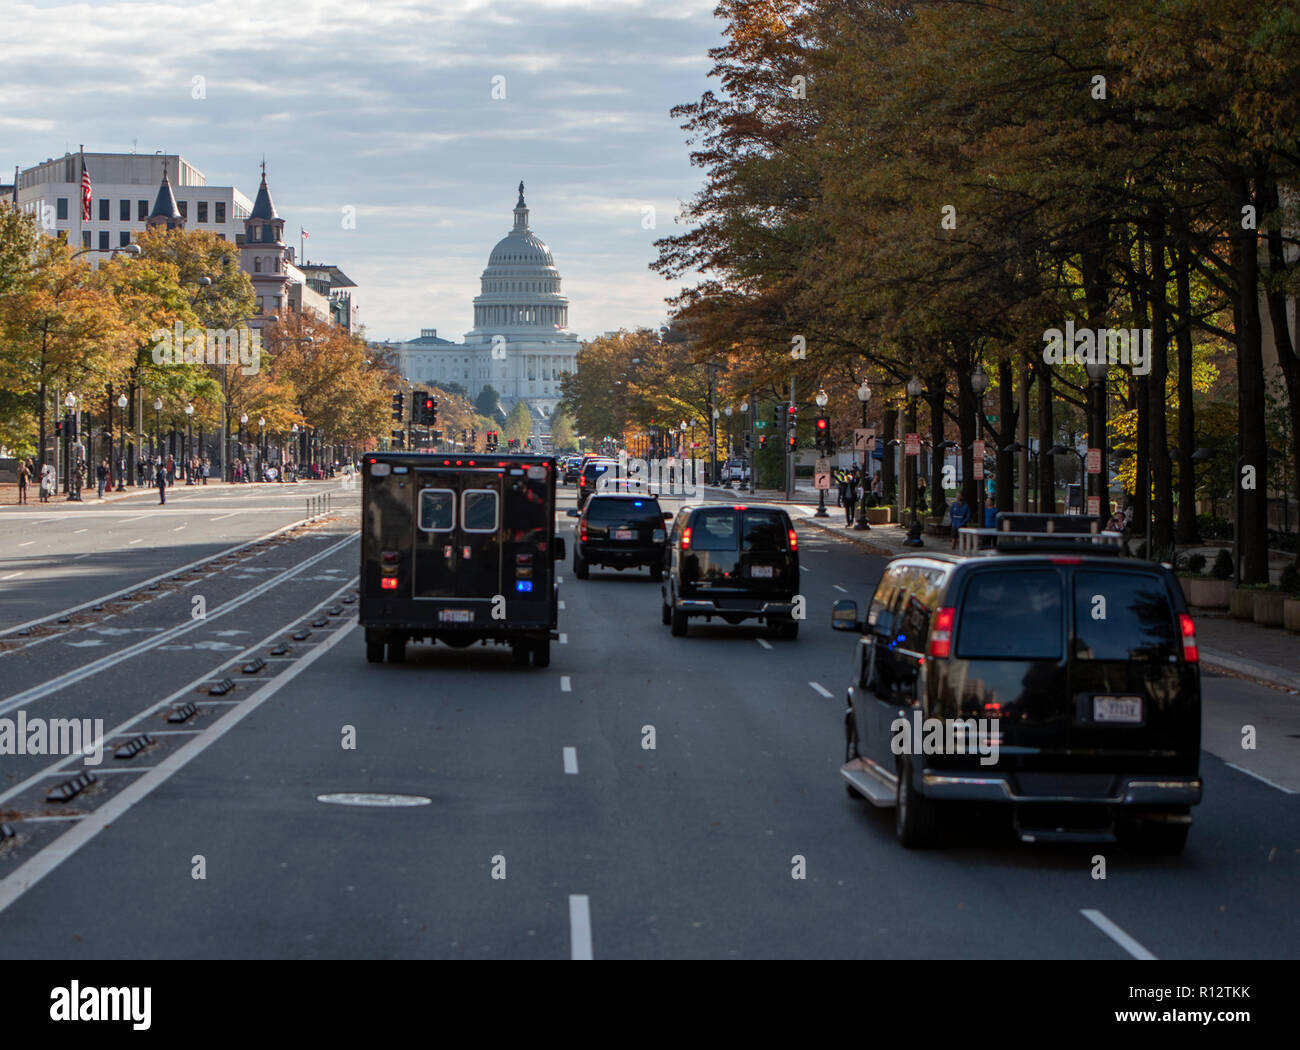 Washington, United States Of America. 08th Nov, 2018. The presidential motorcade with United States President Donald J. Trump and First lady Melania Trump aboard, makes its way up Pennsylvania Avenue to the Supreme Court of the US in Washington, DC for the investiture of Associate Justice of the Supreme Court Brett Kavanaugh on Thursday, November 8, 2018. Credit: Ron Sachs/Pool via CNP | usage worldwide Credit: dpa/Alamy Live News Stock Photo